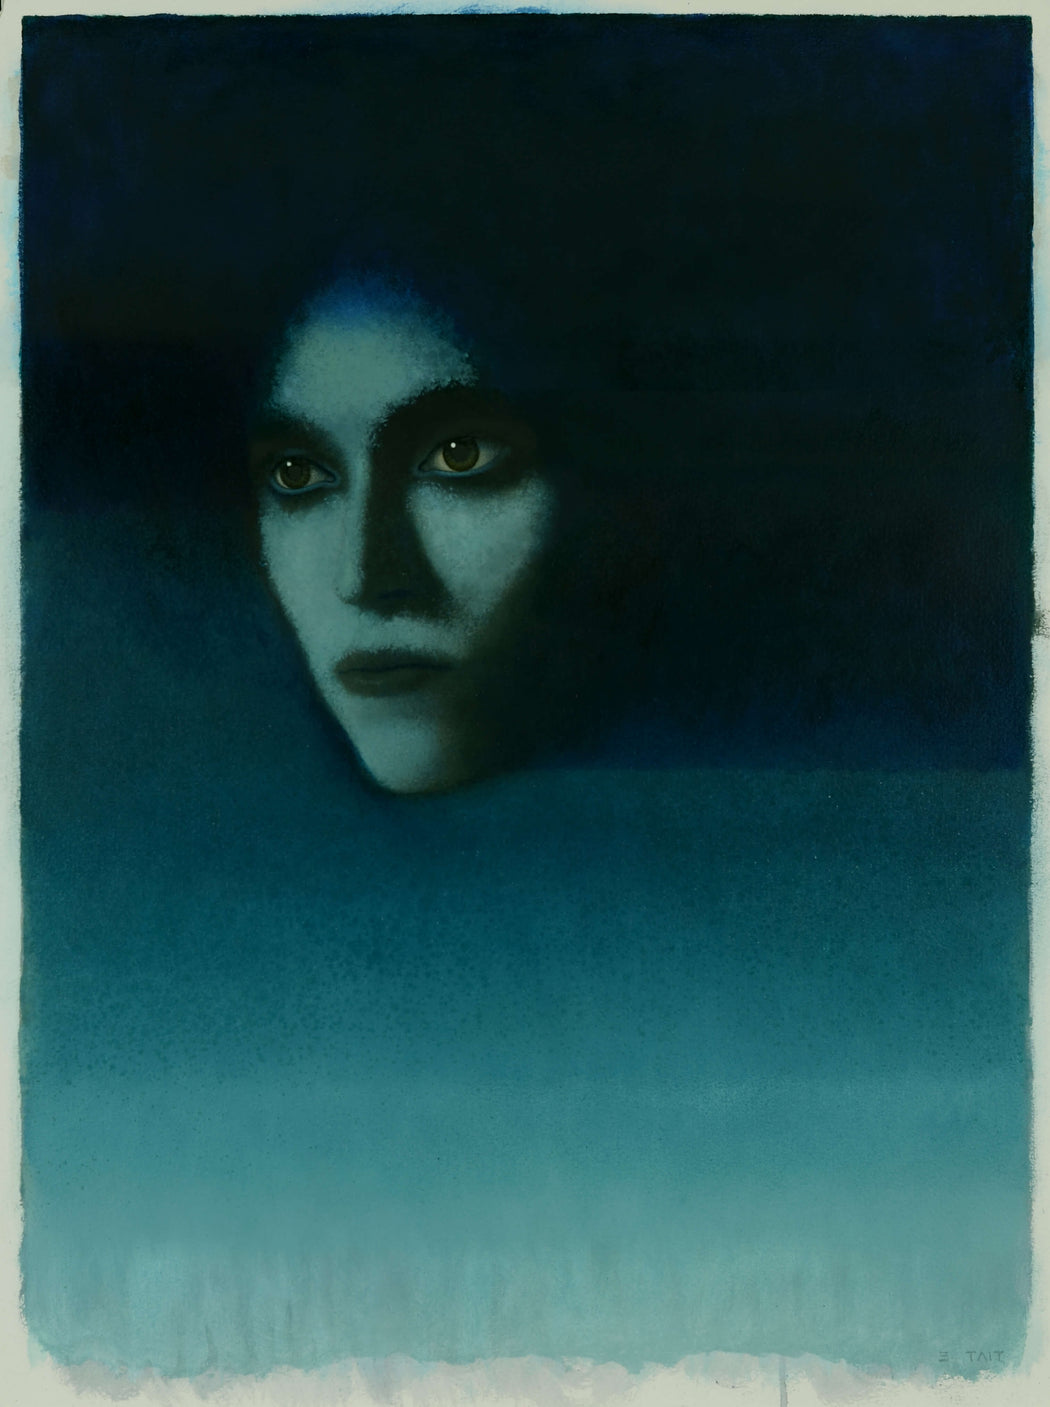 Morning Star by Erlend Tait, original oil painting of a person's face in blue in blue tones. | Original portrait art for sale at The Biscuit Factory Newcastle.